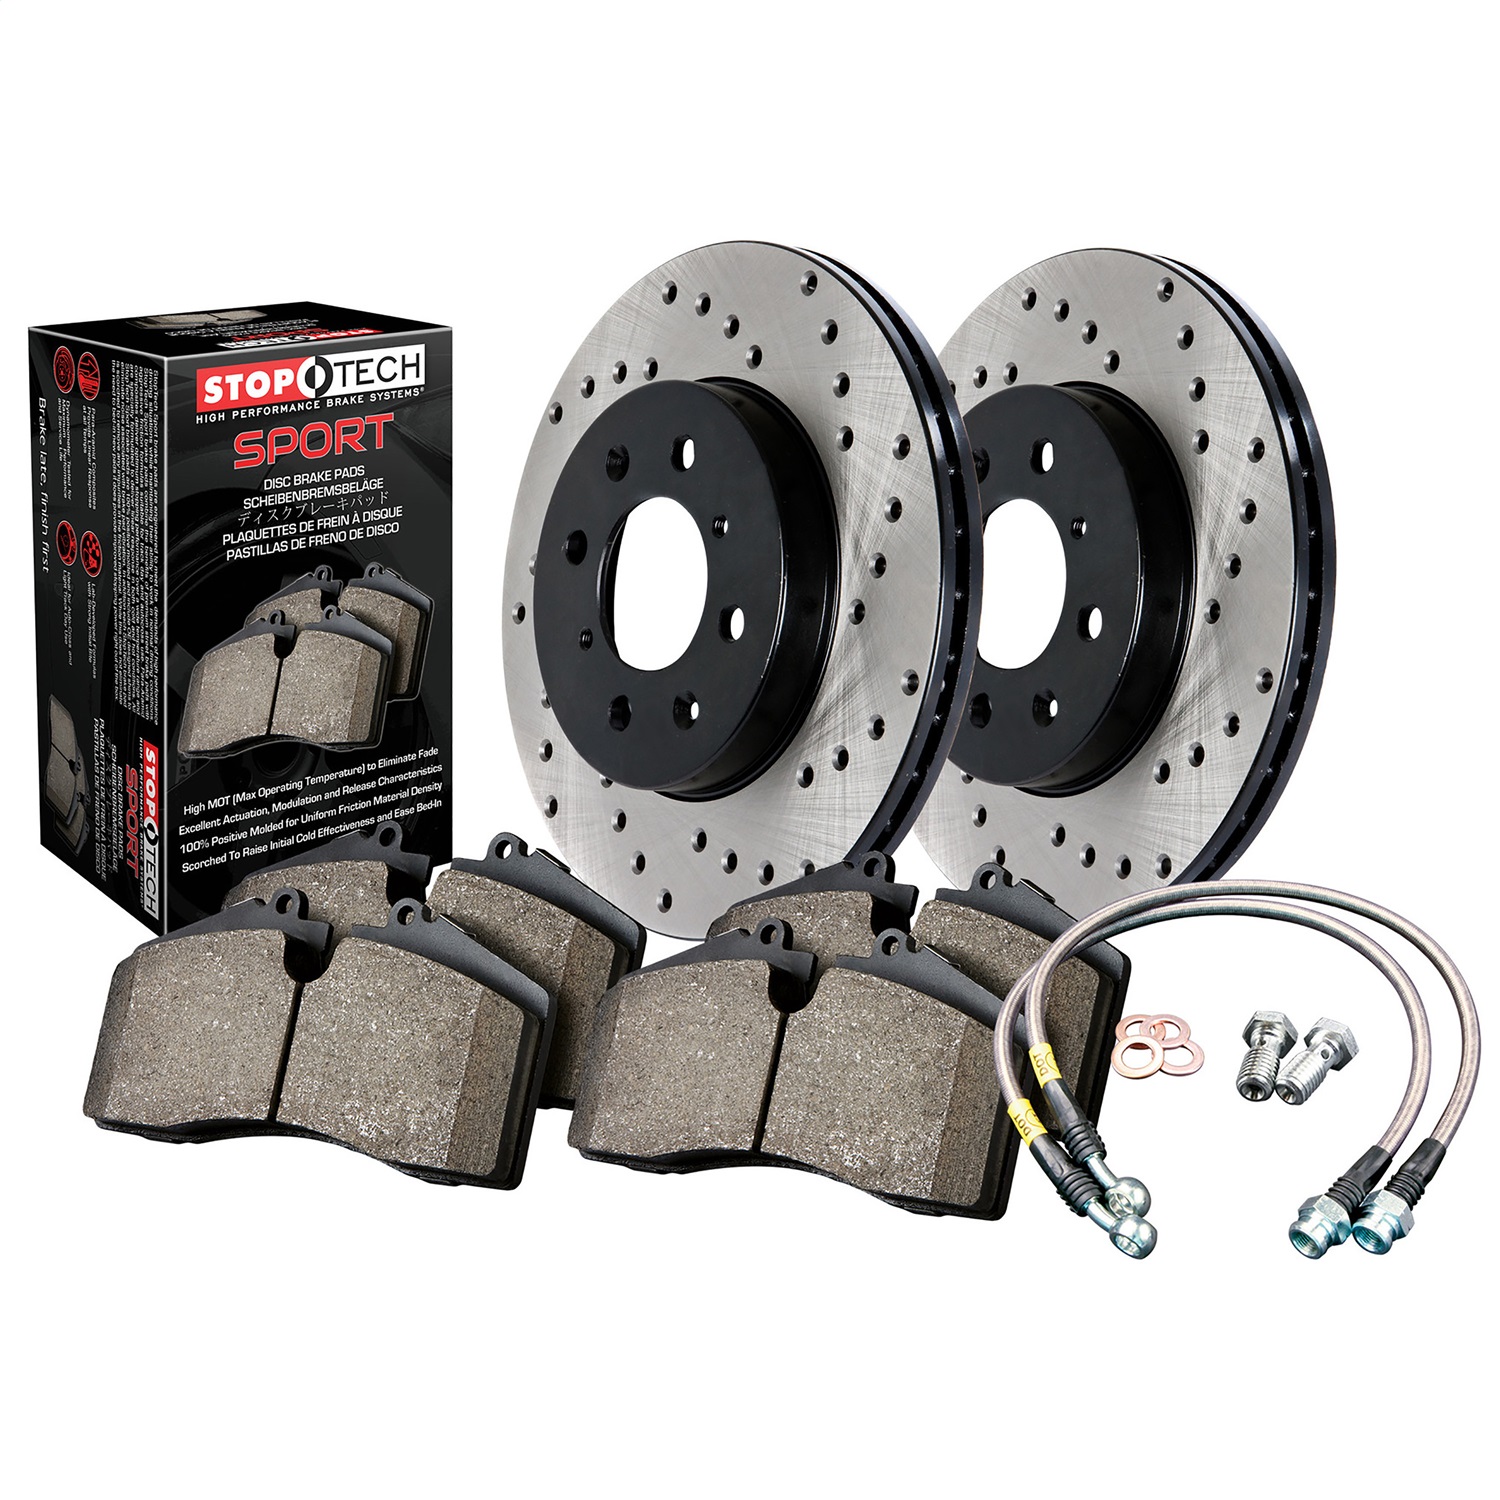 StopTech 979.44016R Sport Disc Brake Kit w/Cross-Drilled Rotors Fits BRZ FR-S